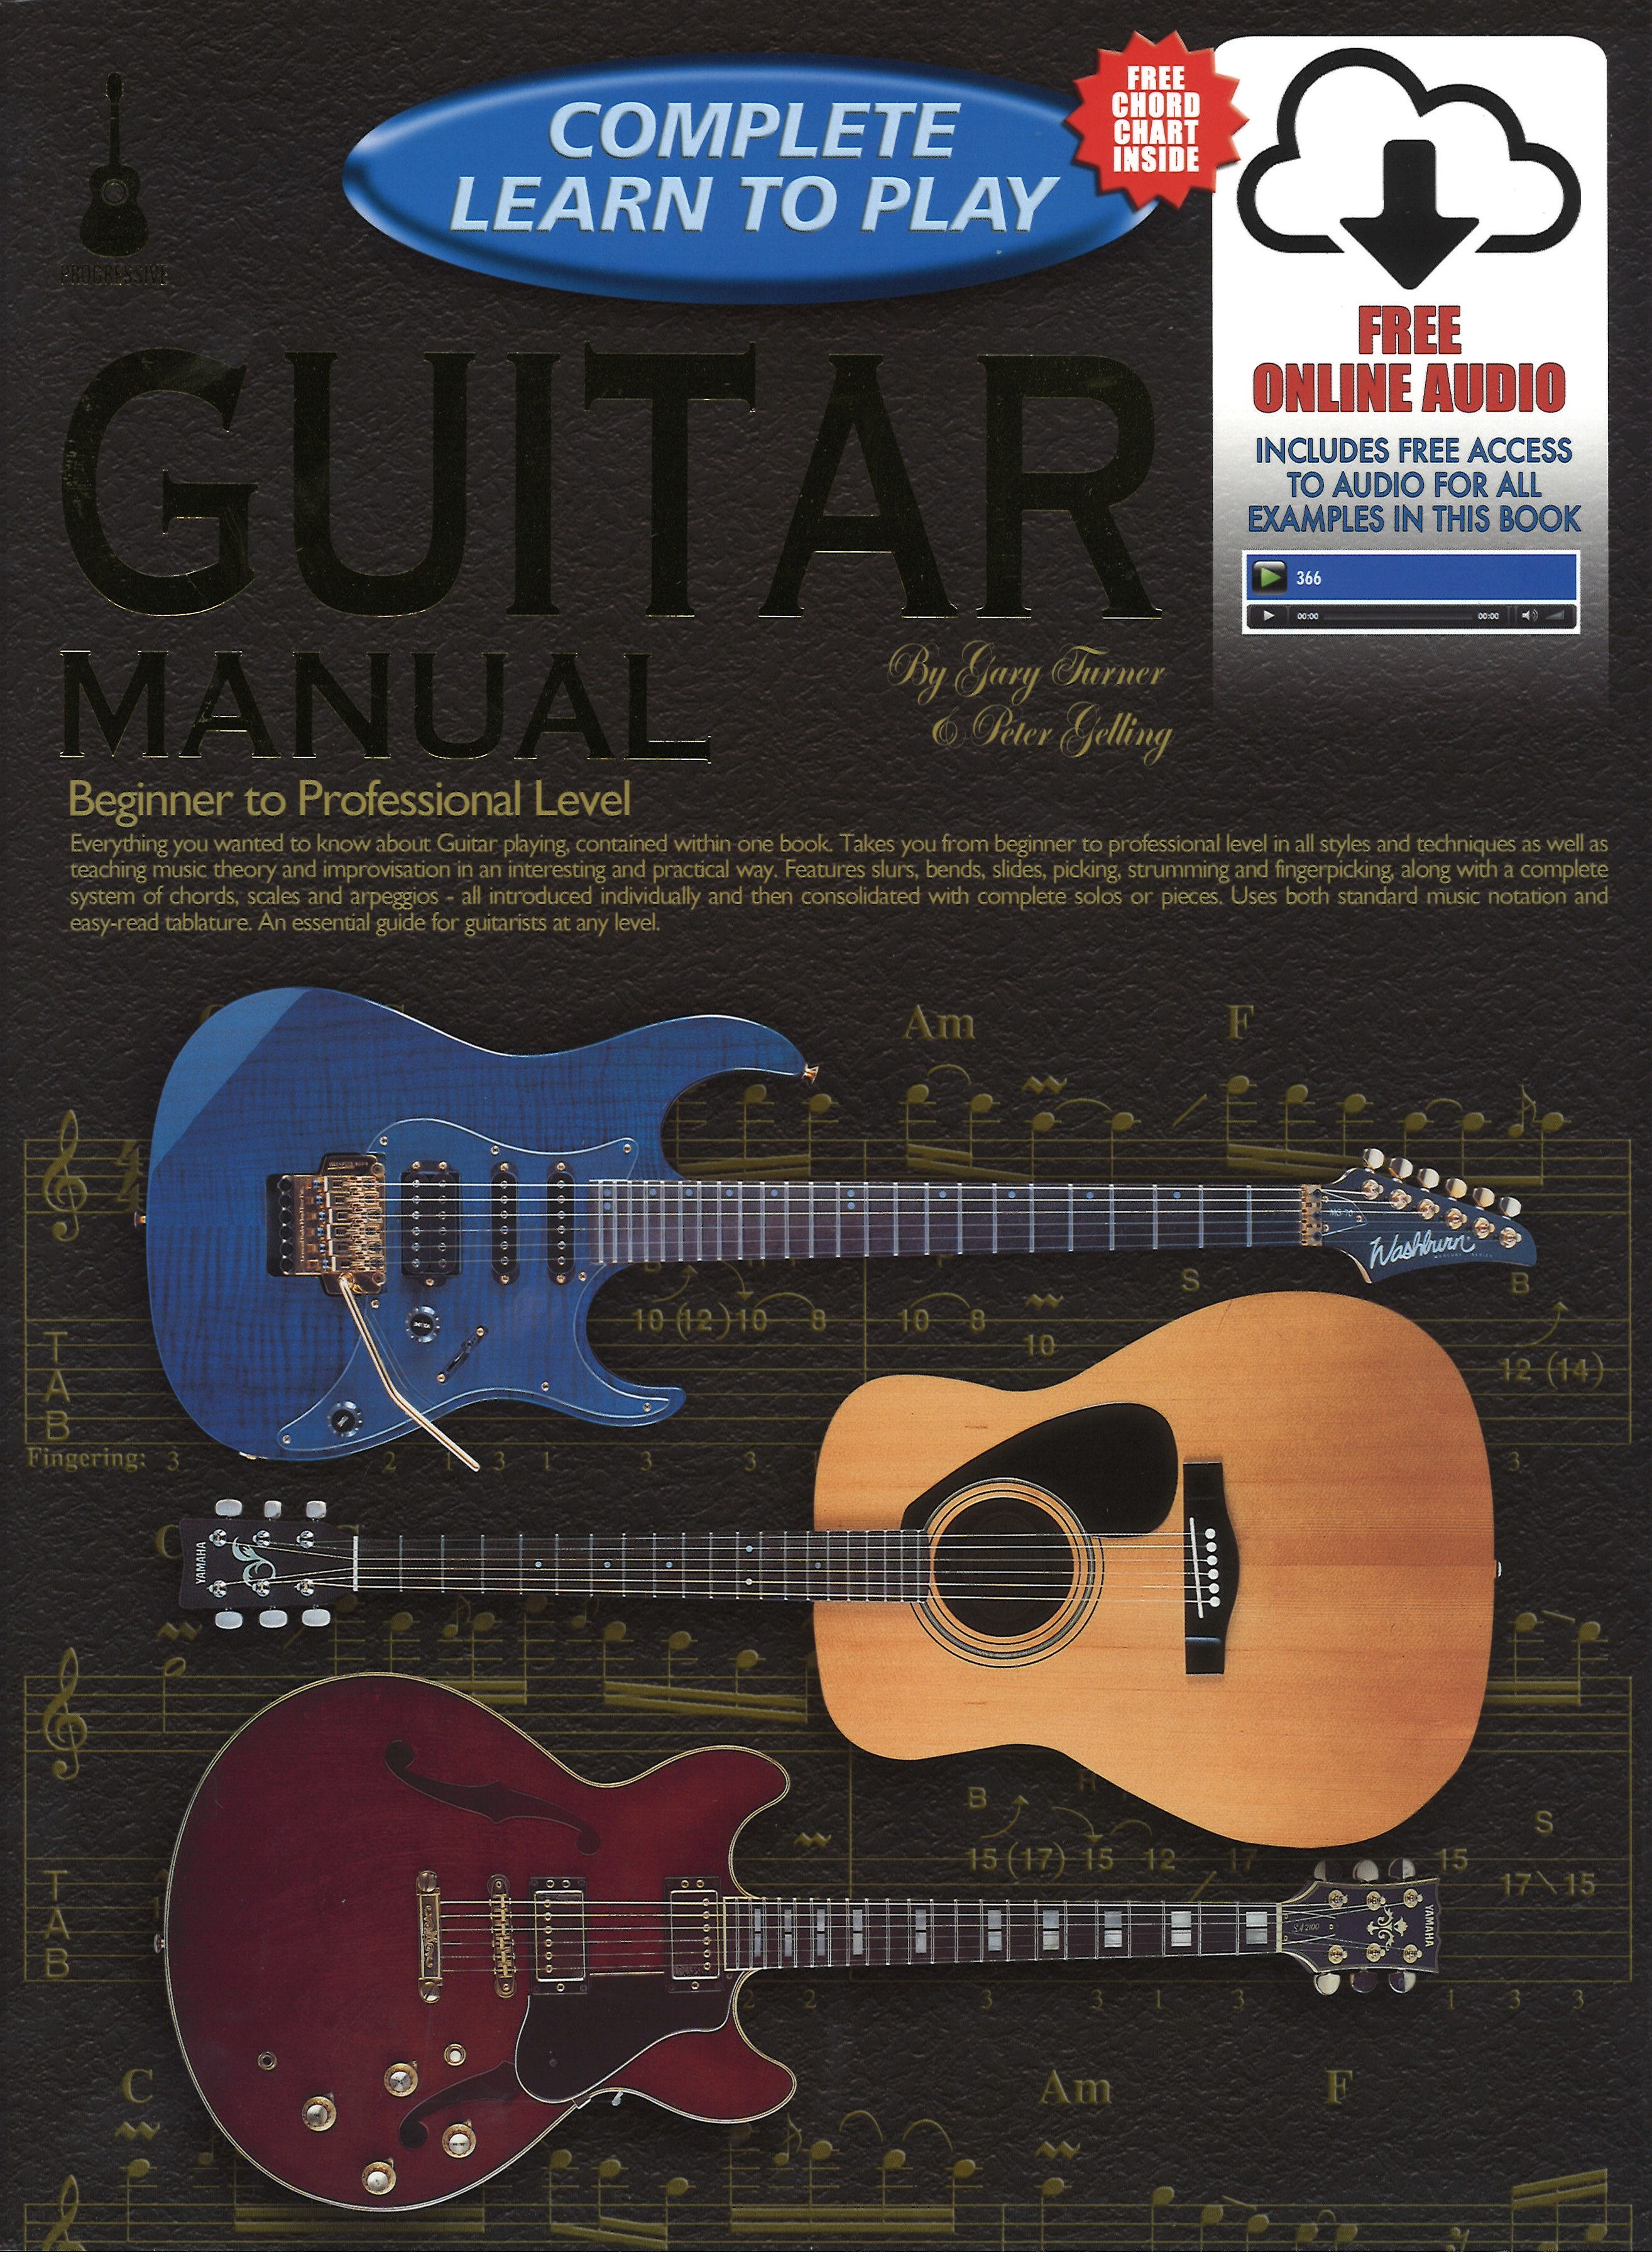 Complete Learn To Play Guitar Manual + Cds Sheet Music Songbook